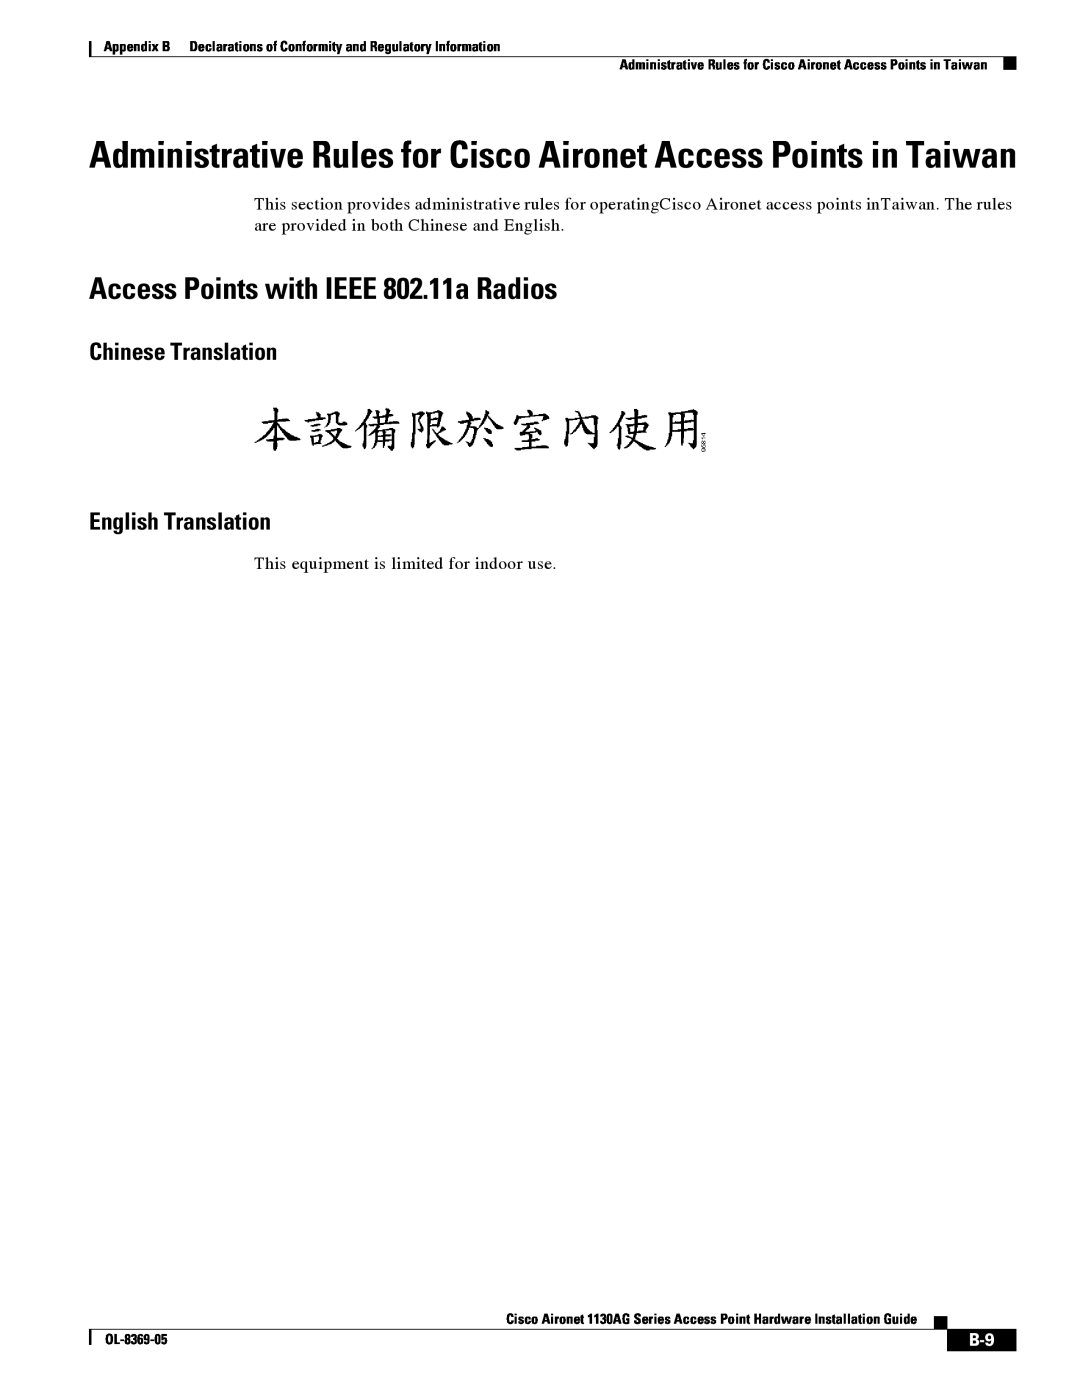 Cisco Systems 1130AG manual Administrative Rules for Cisco Aironet Access Points in Taiwan, OL-8369-05 